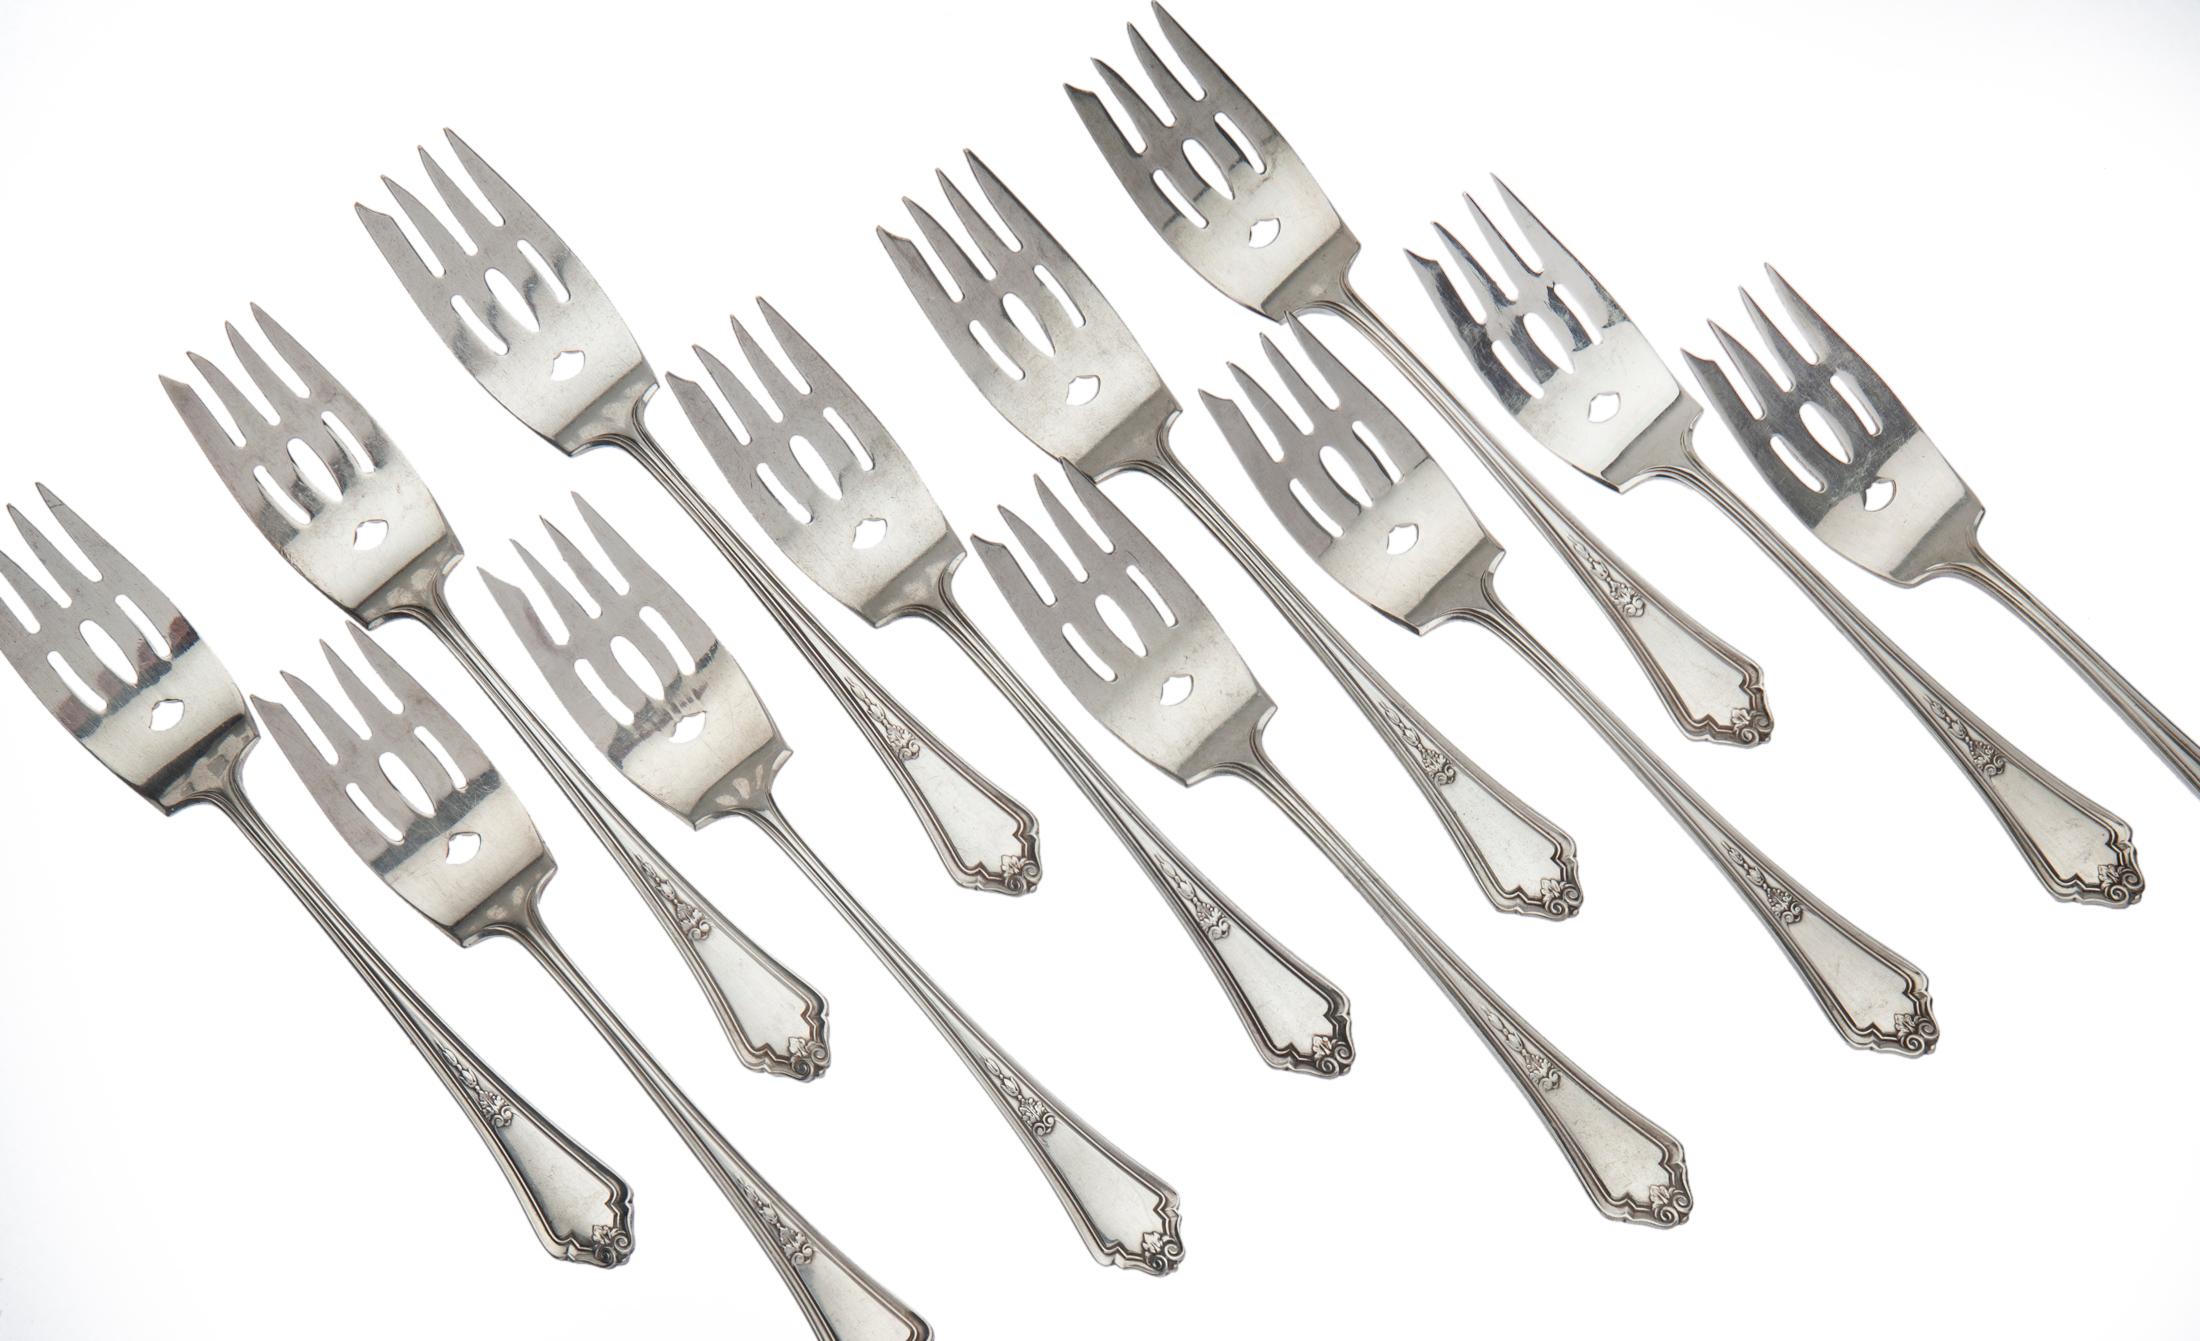 Silver plate salad forks by Gorham in the Shelburne pattern in excellent antique condition. The pattern is from 1914 and marked EP pat. 1914.
 